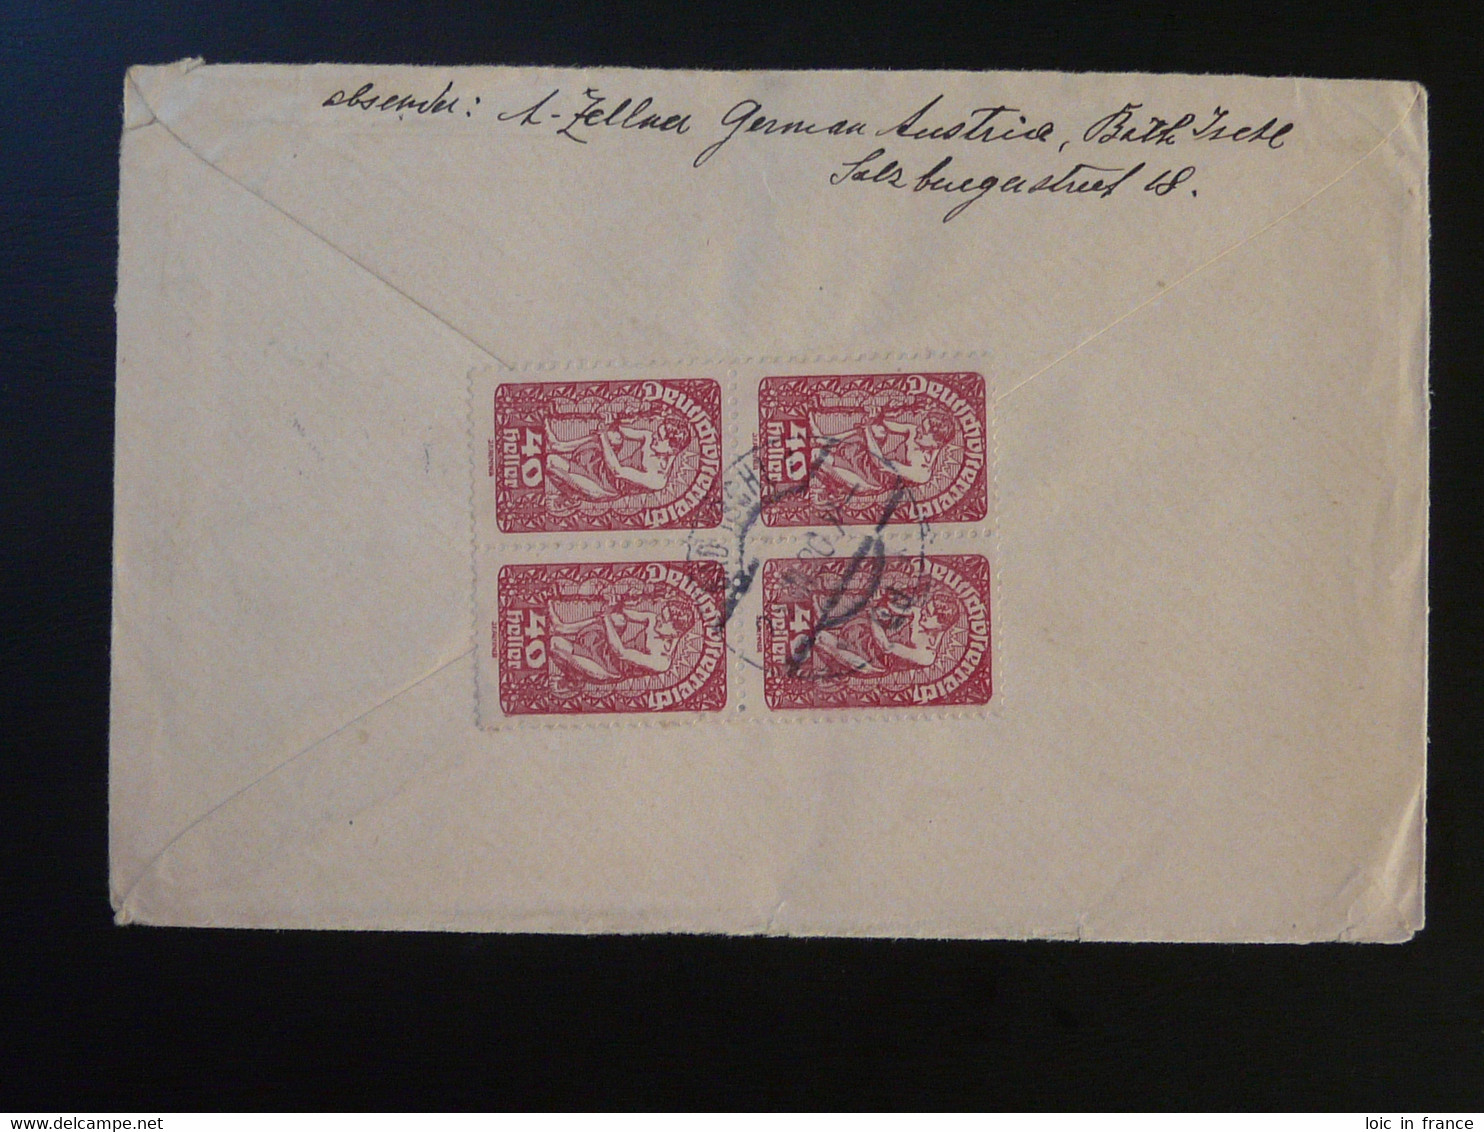 Lettre Cover Bad Ischl --> New Haven USA 1920 - Lettres & Documents